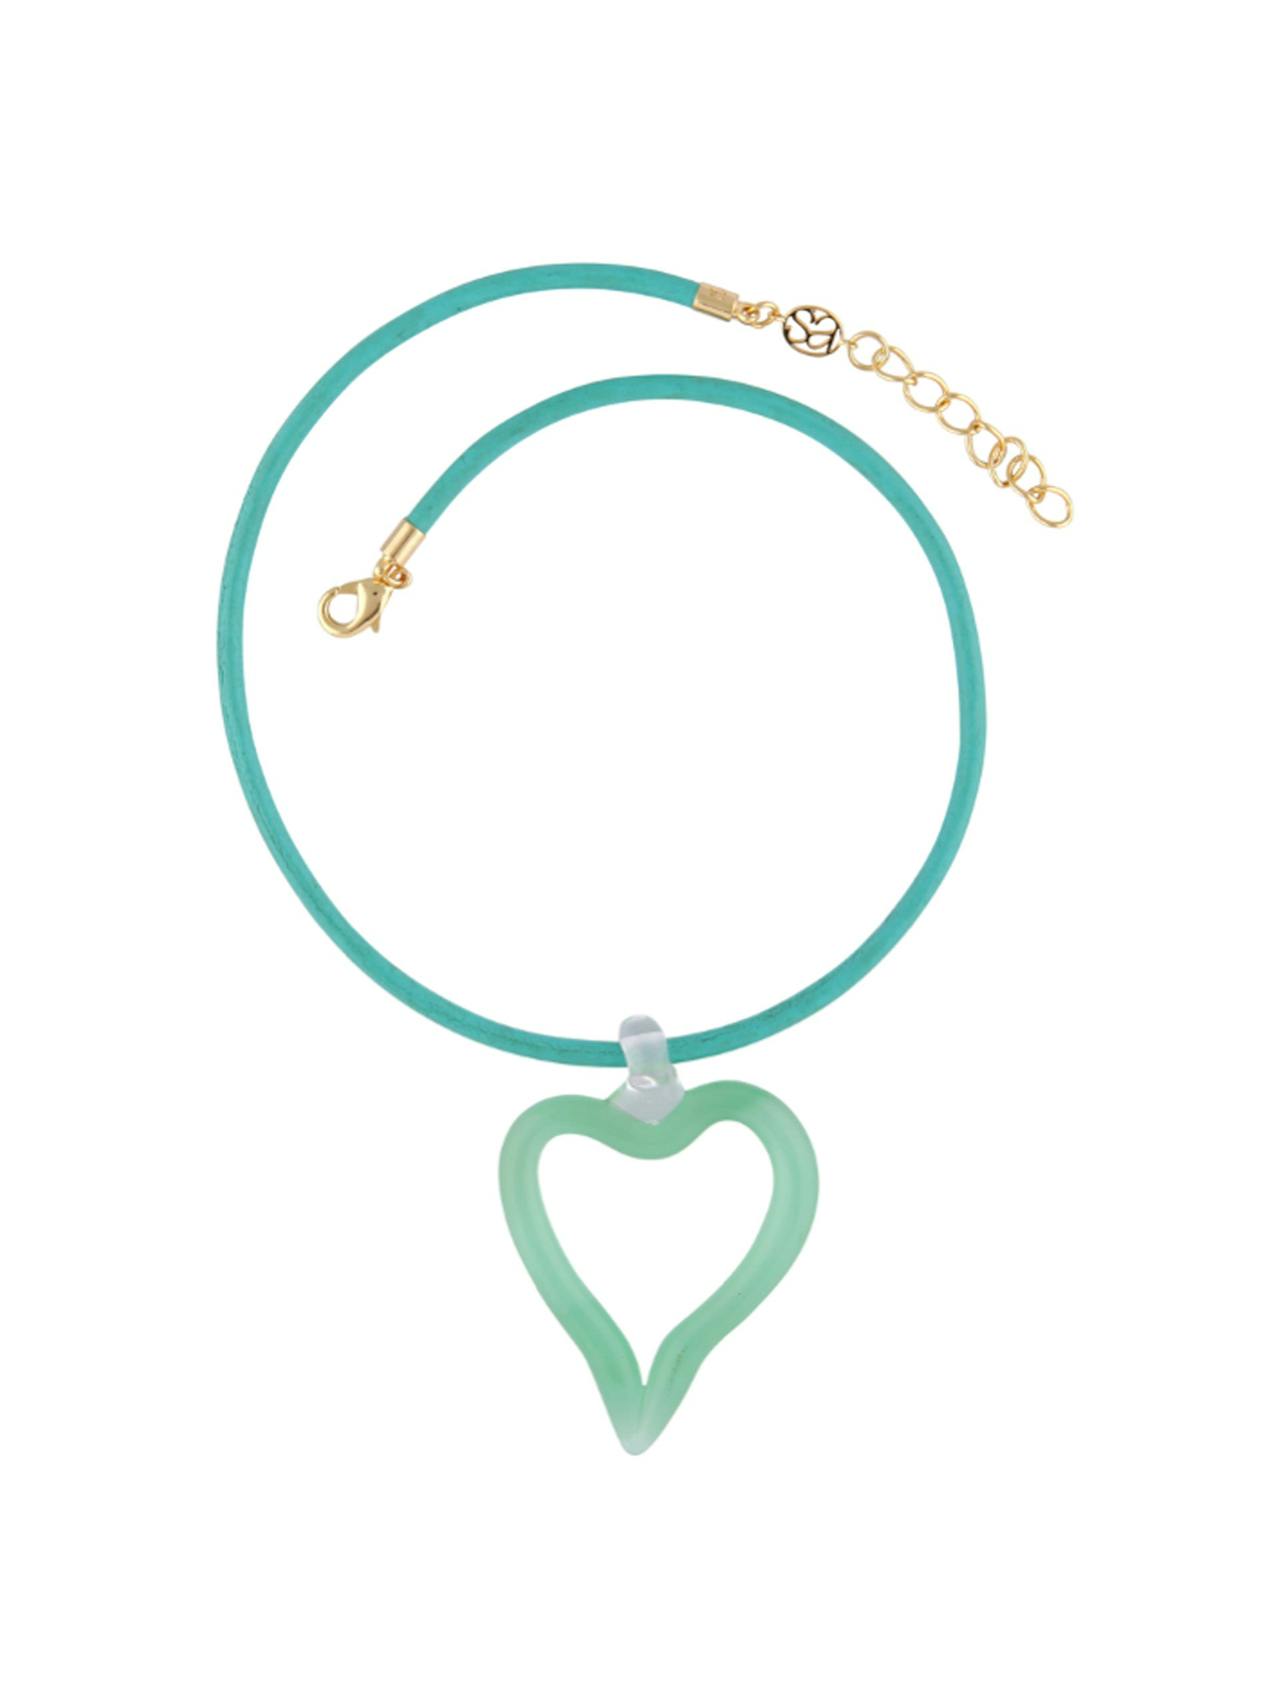 Jade green XL Heart of Glass leather cord necklace